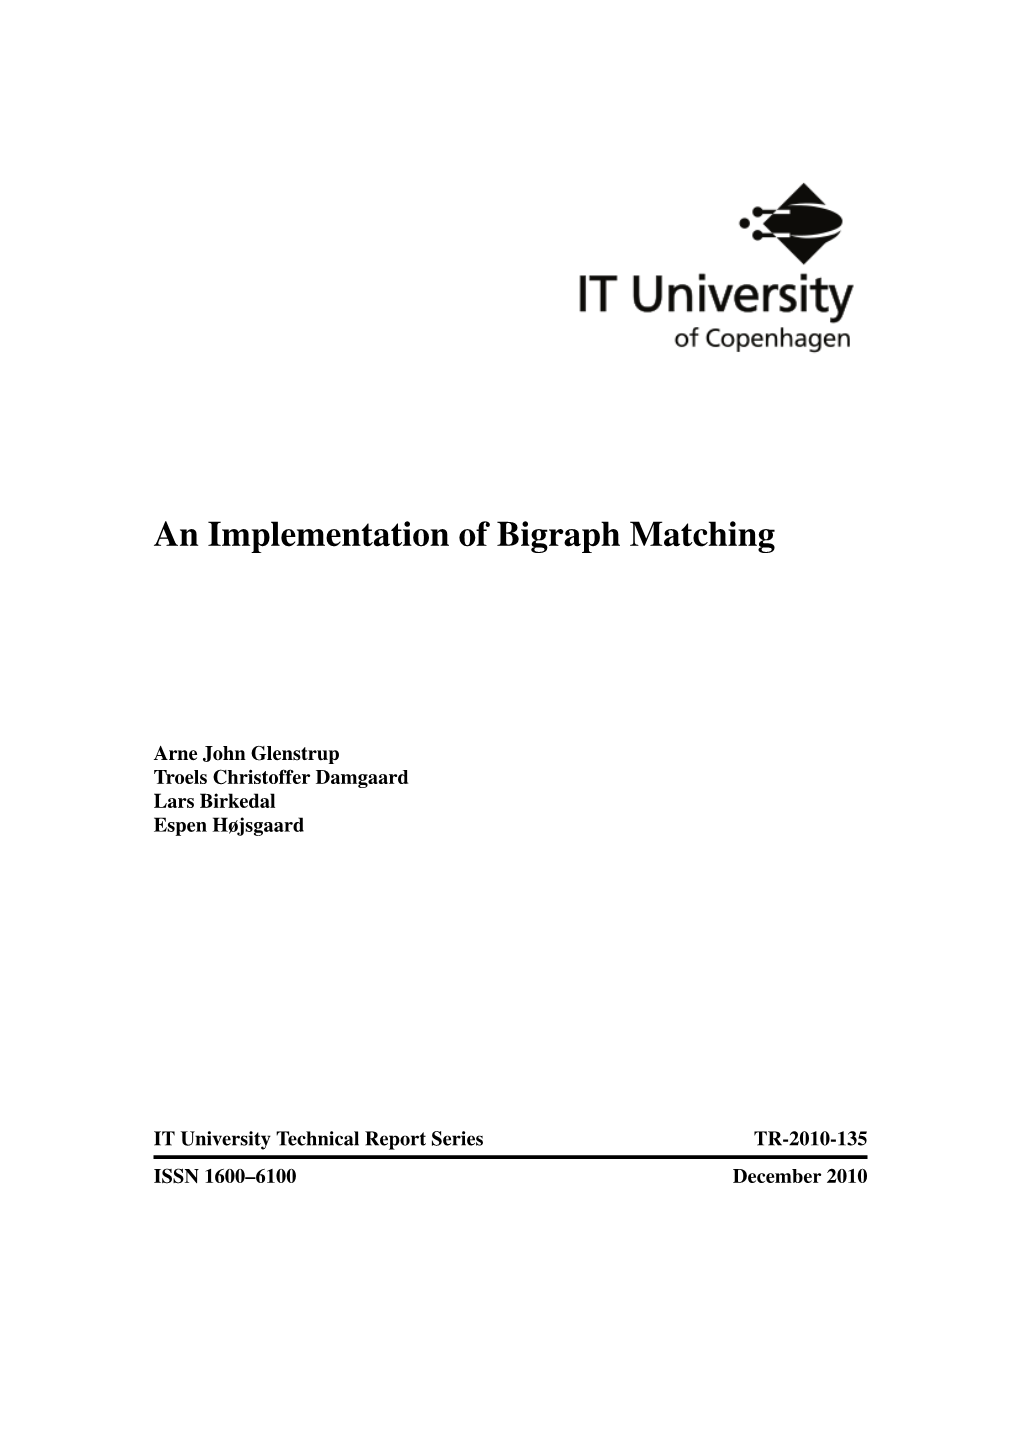 An Implementation of Bigraph Matching